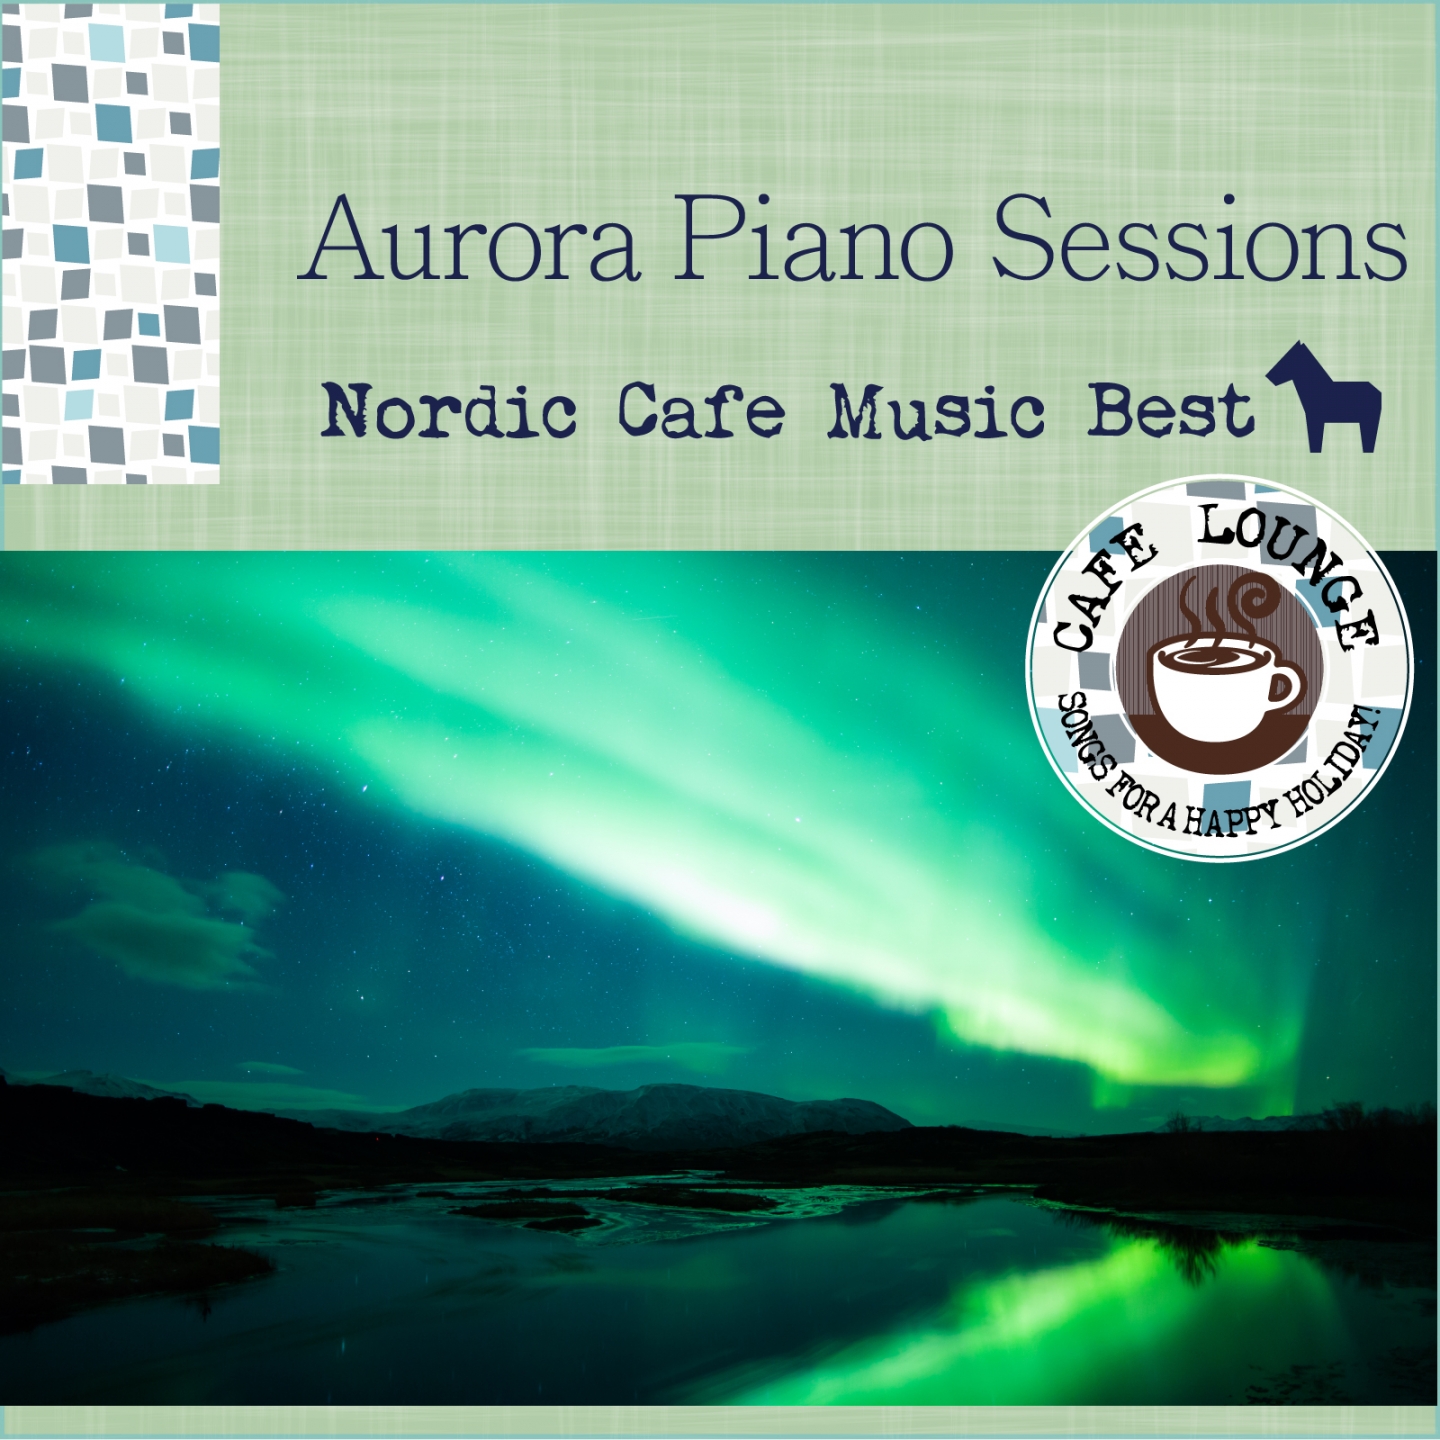 The Best of Nordic Popular Lounge Music - Aurora, Piano Covers